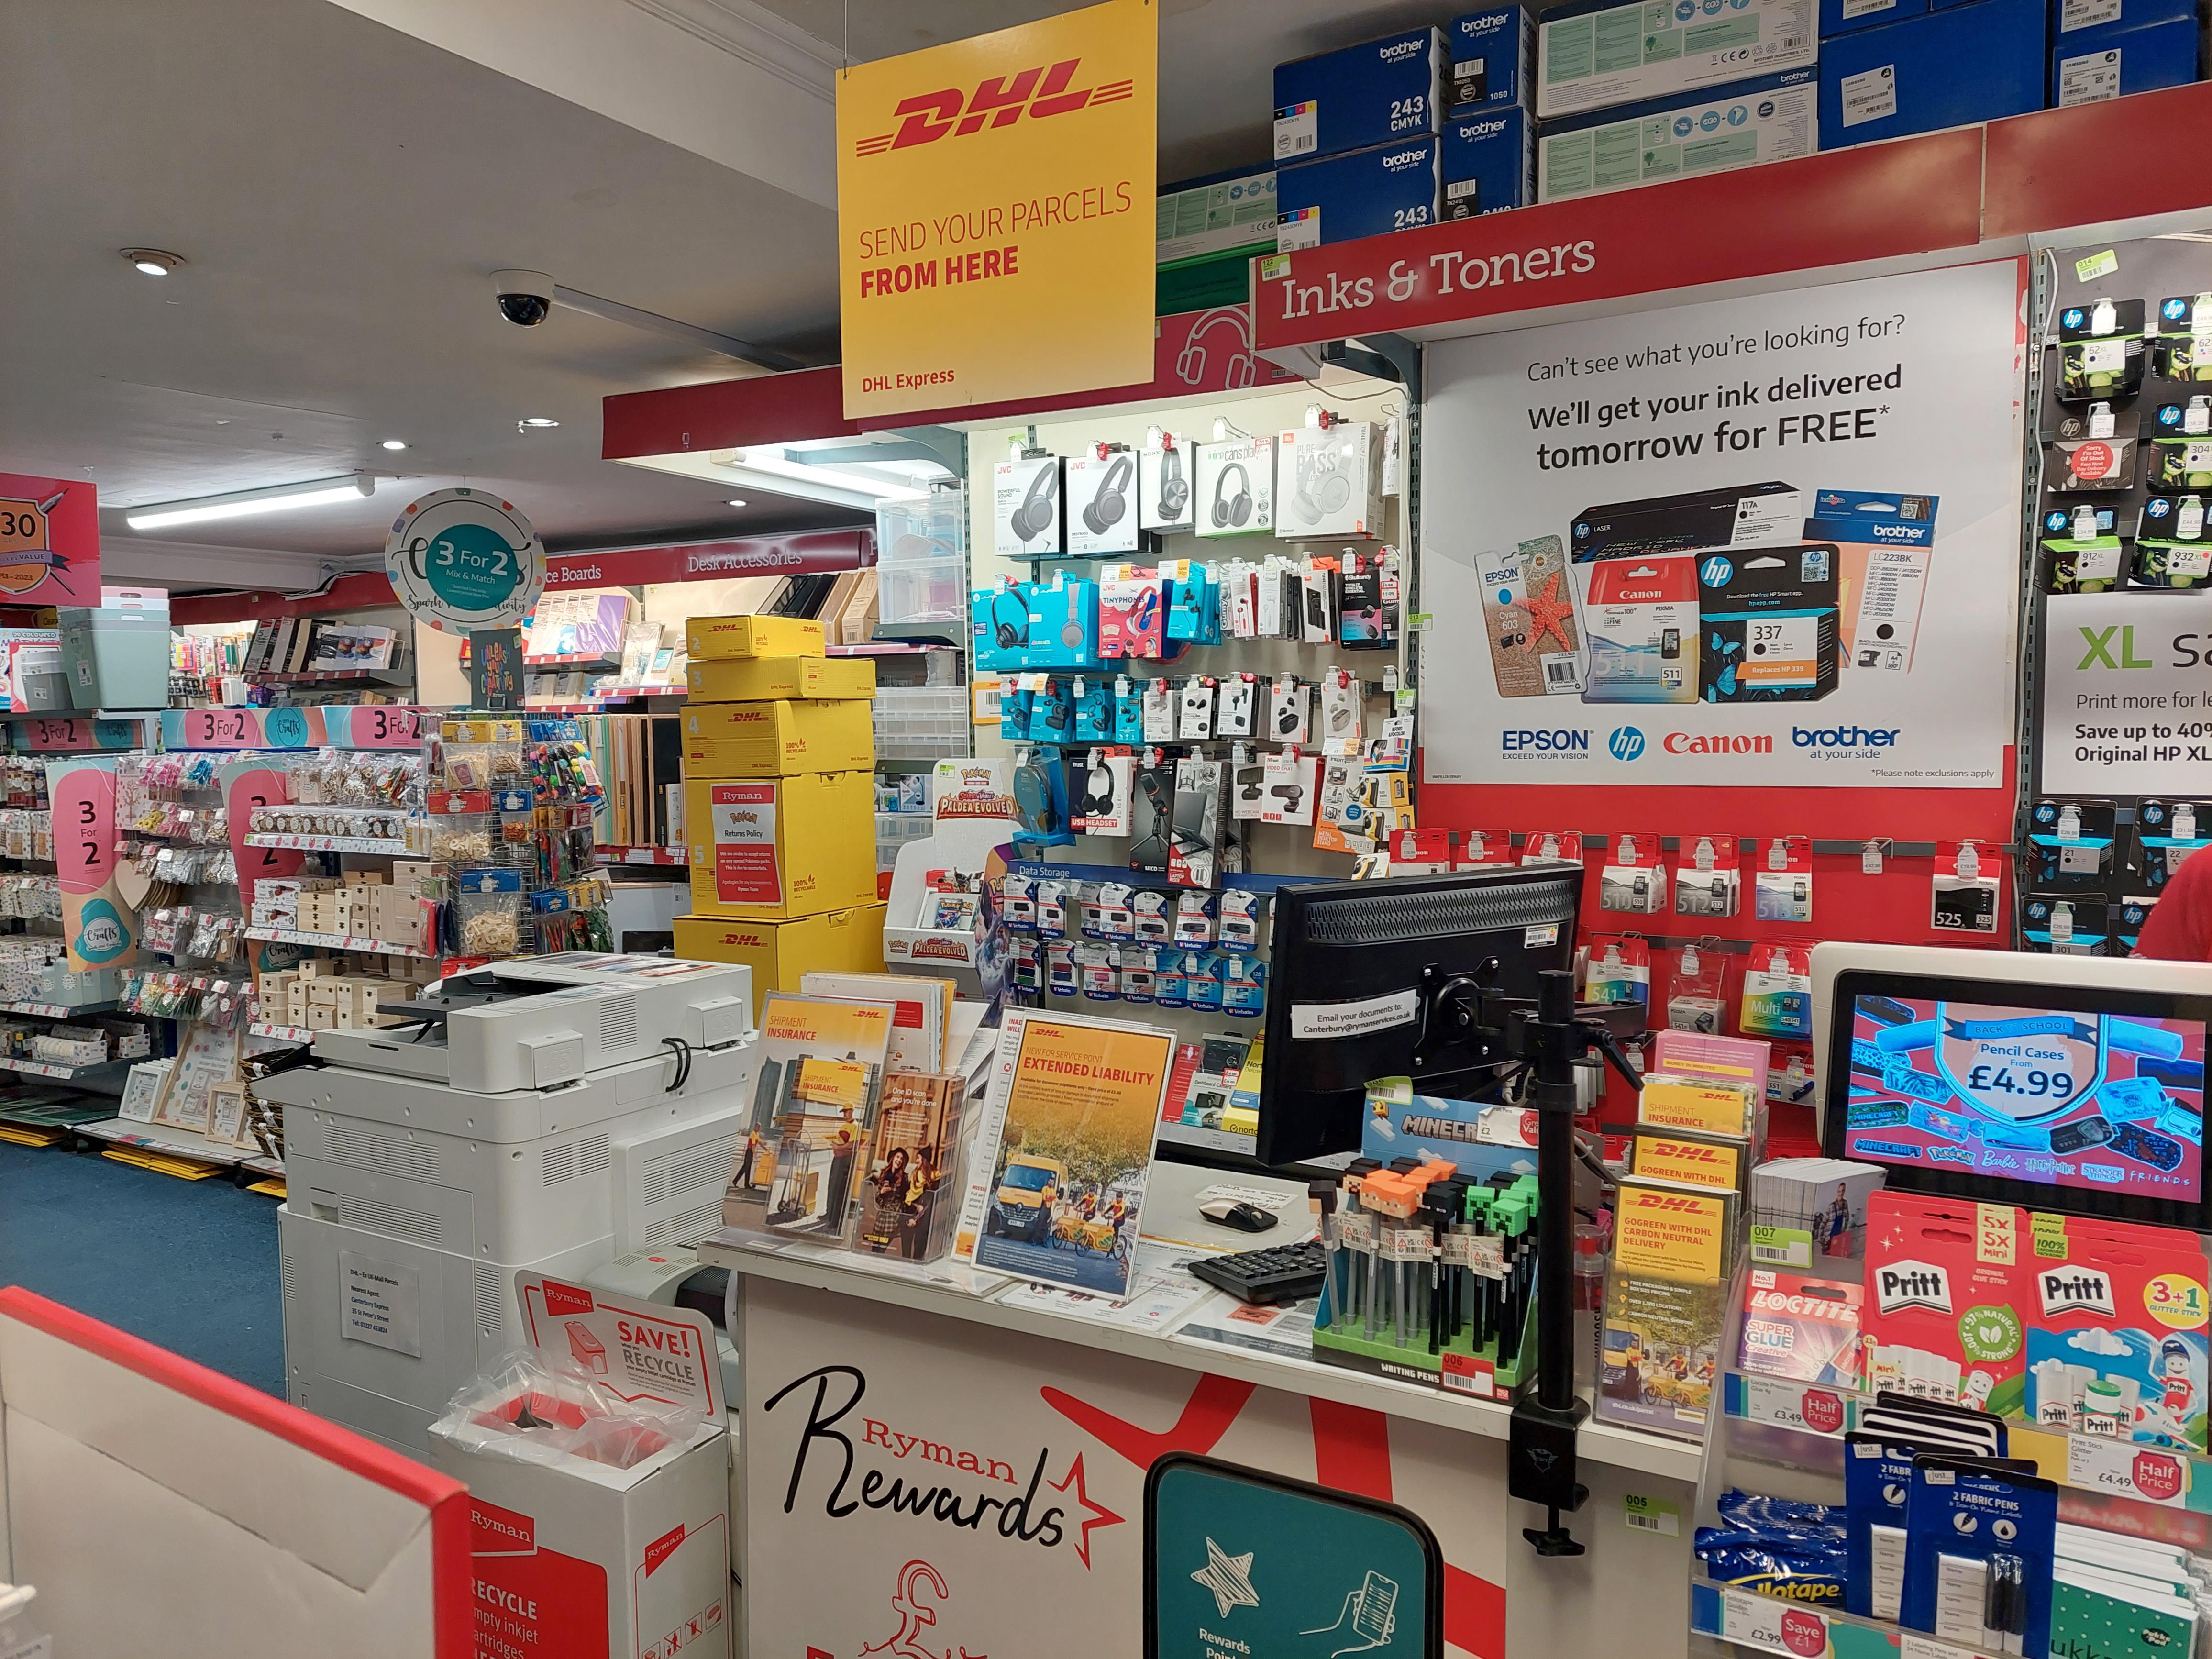 Images DHL Express Service Point (Ryman Canterbury)